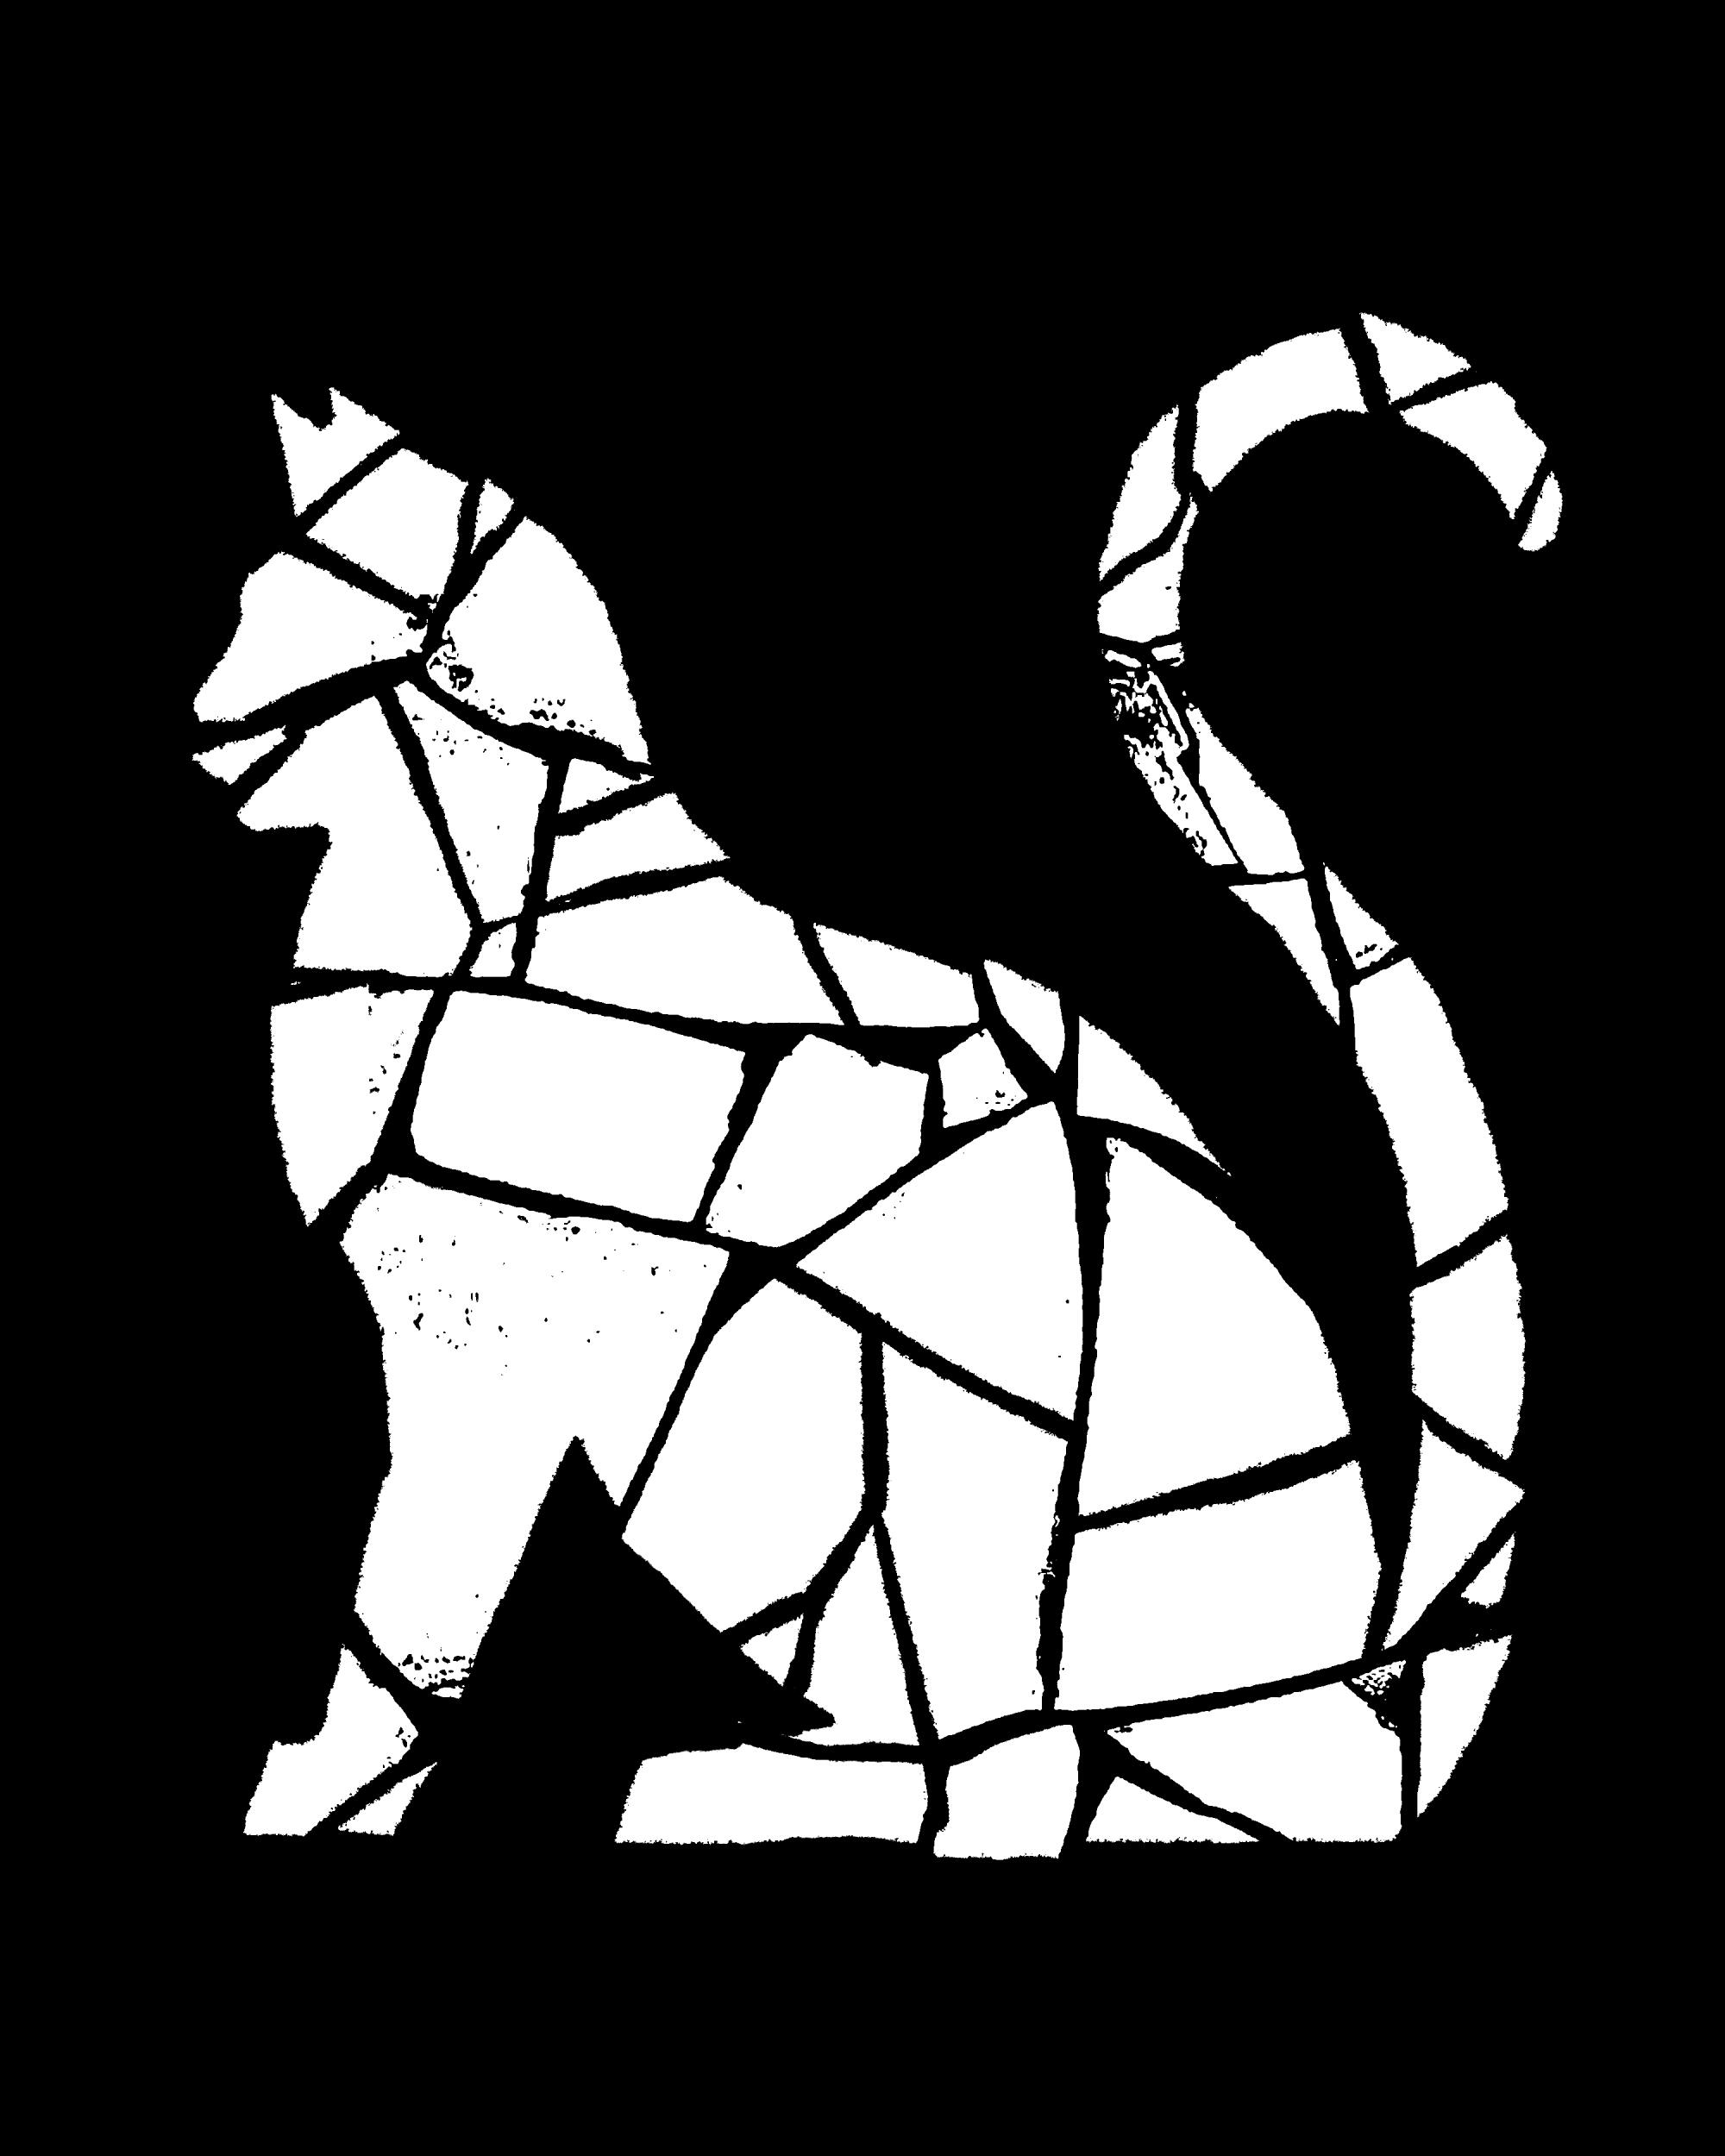 Illustration of a cat with rubble texture on a black background